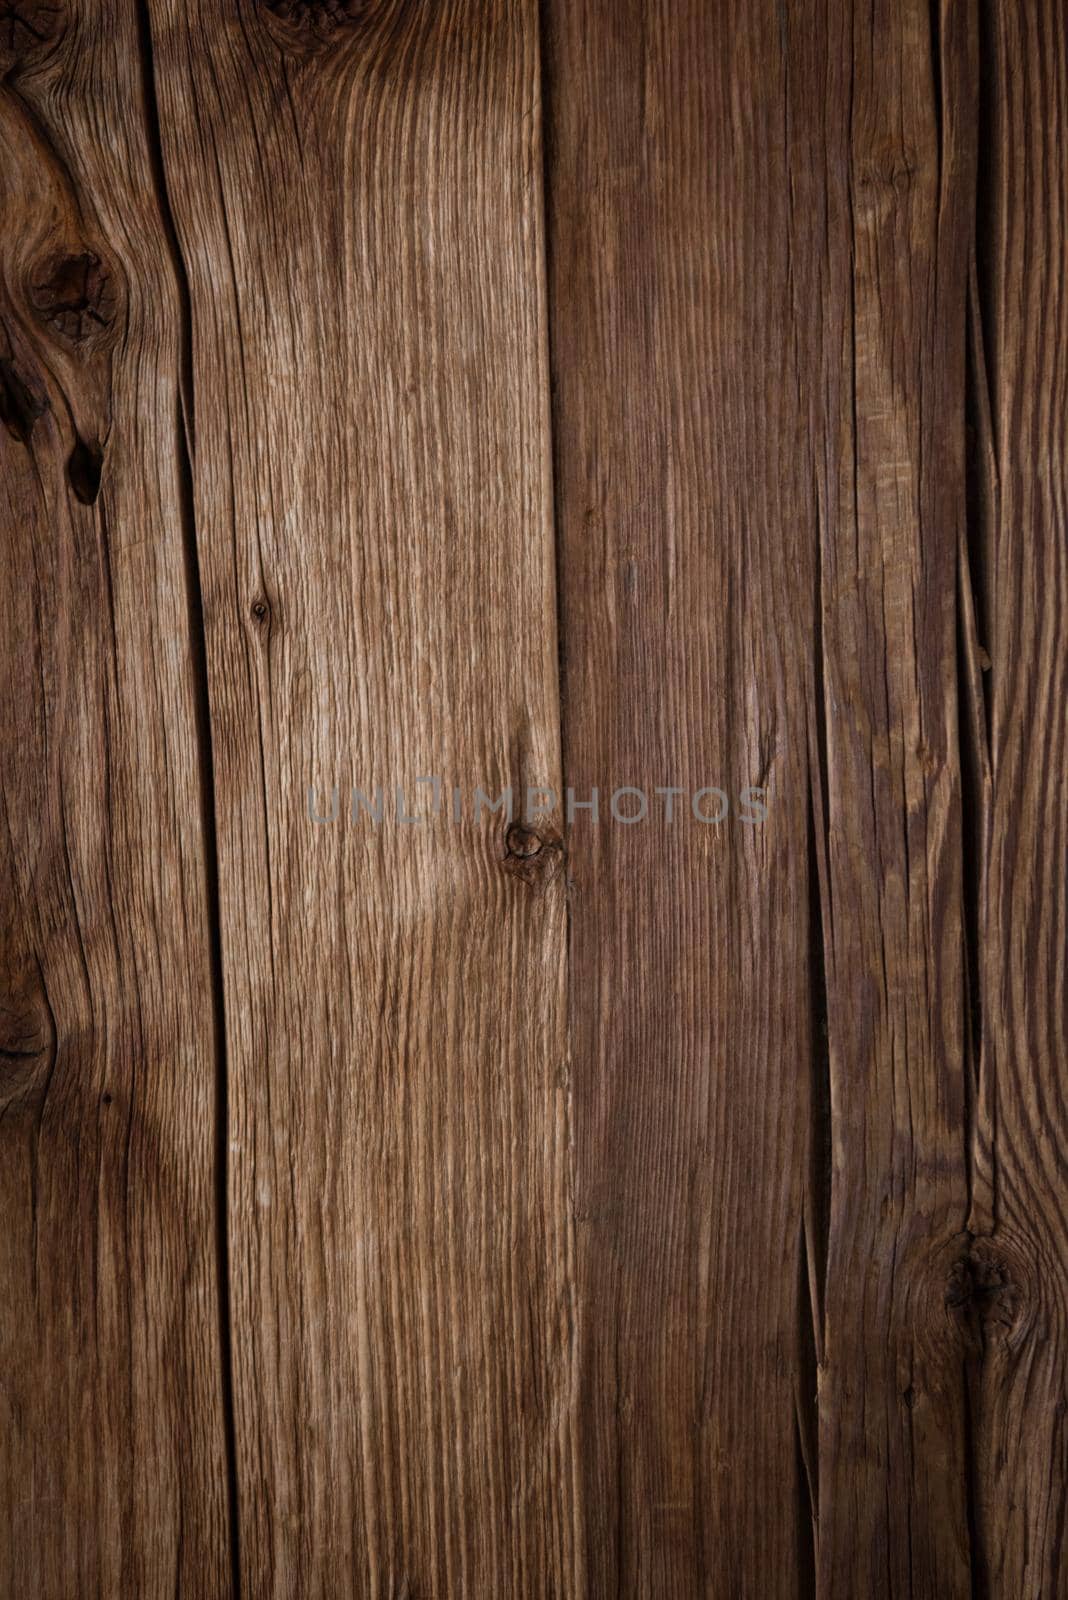 old vintage retro wood wall background